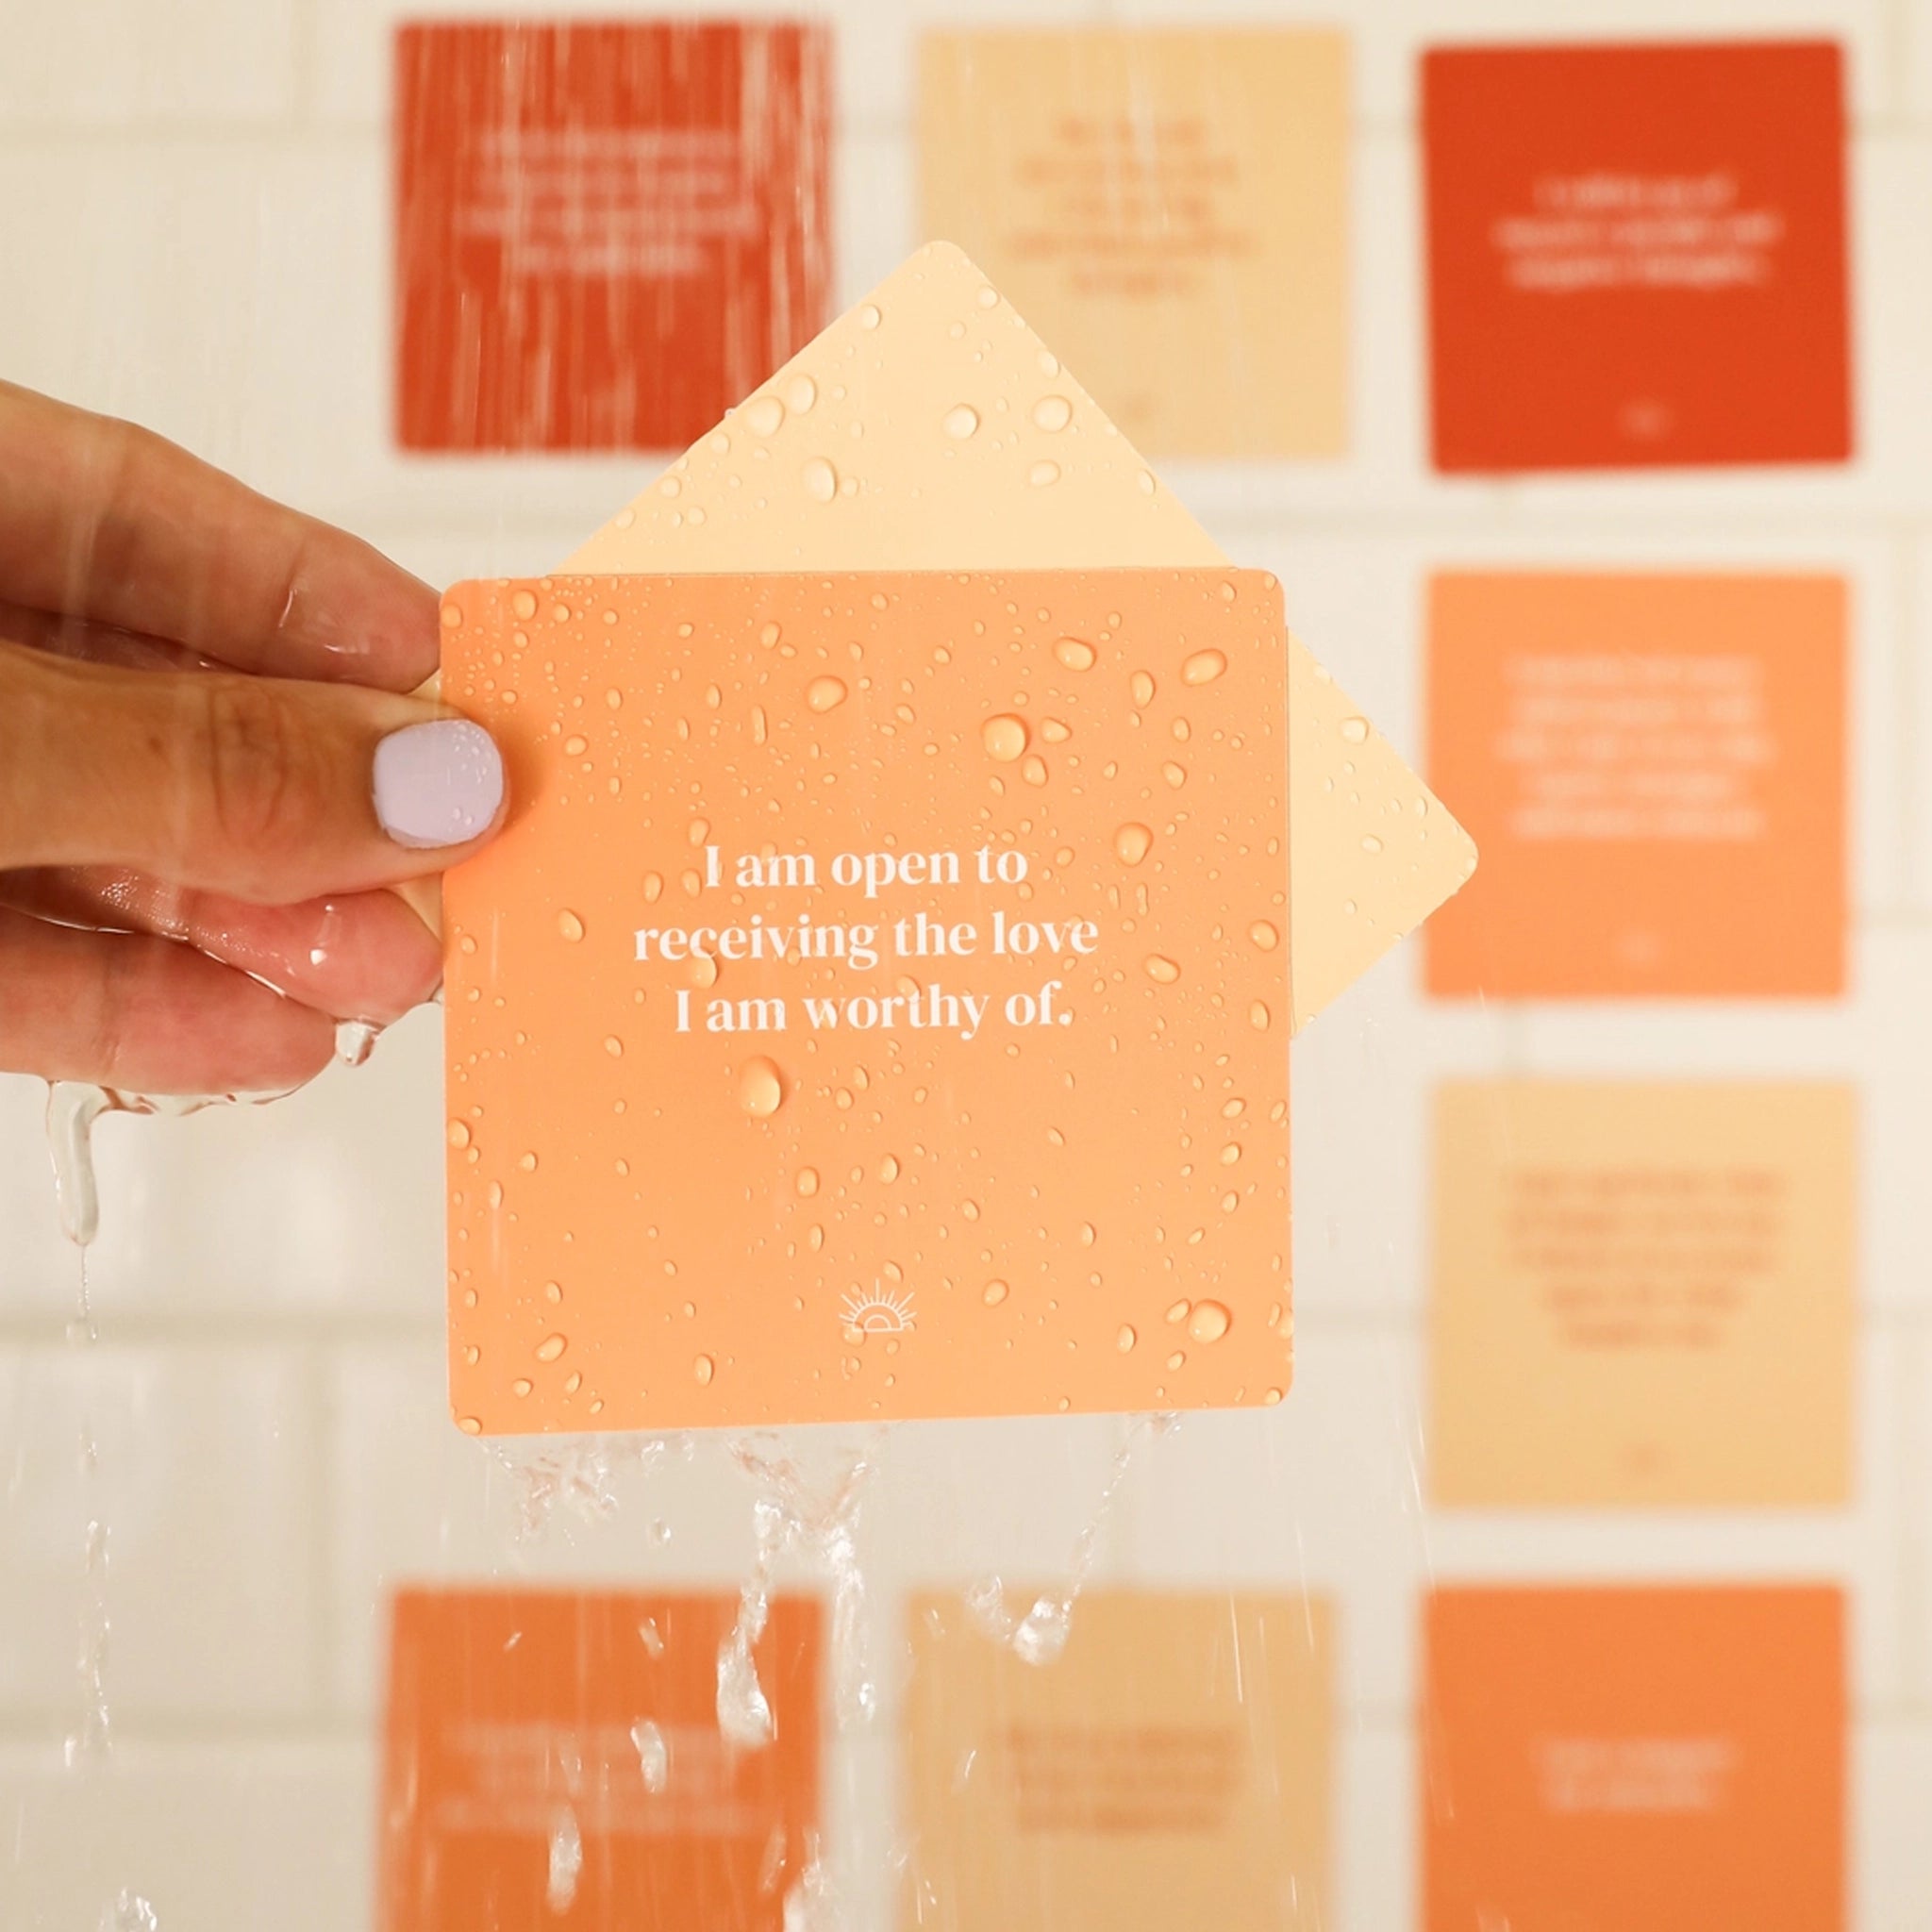 Cards with affirmations related to positivity in different shades of orange along with a shower steamer.